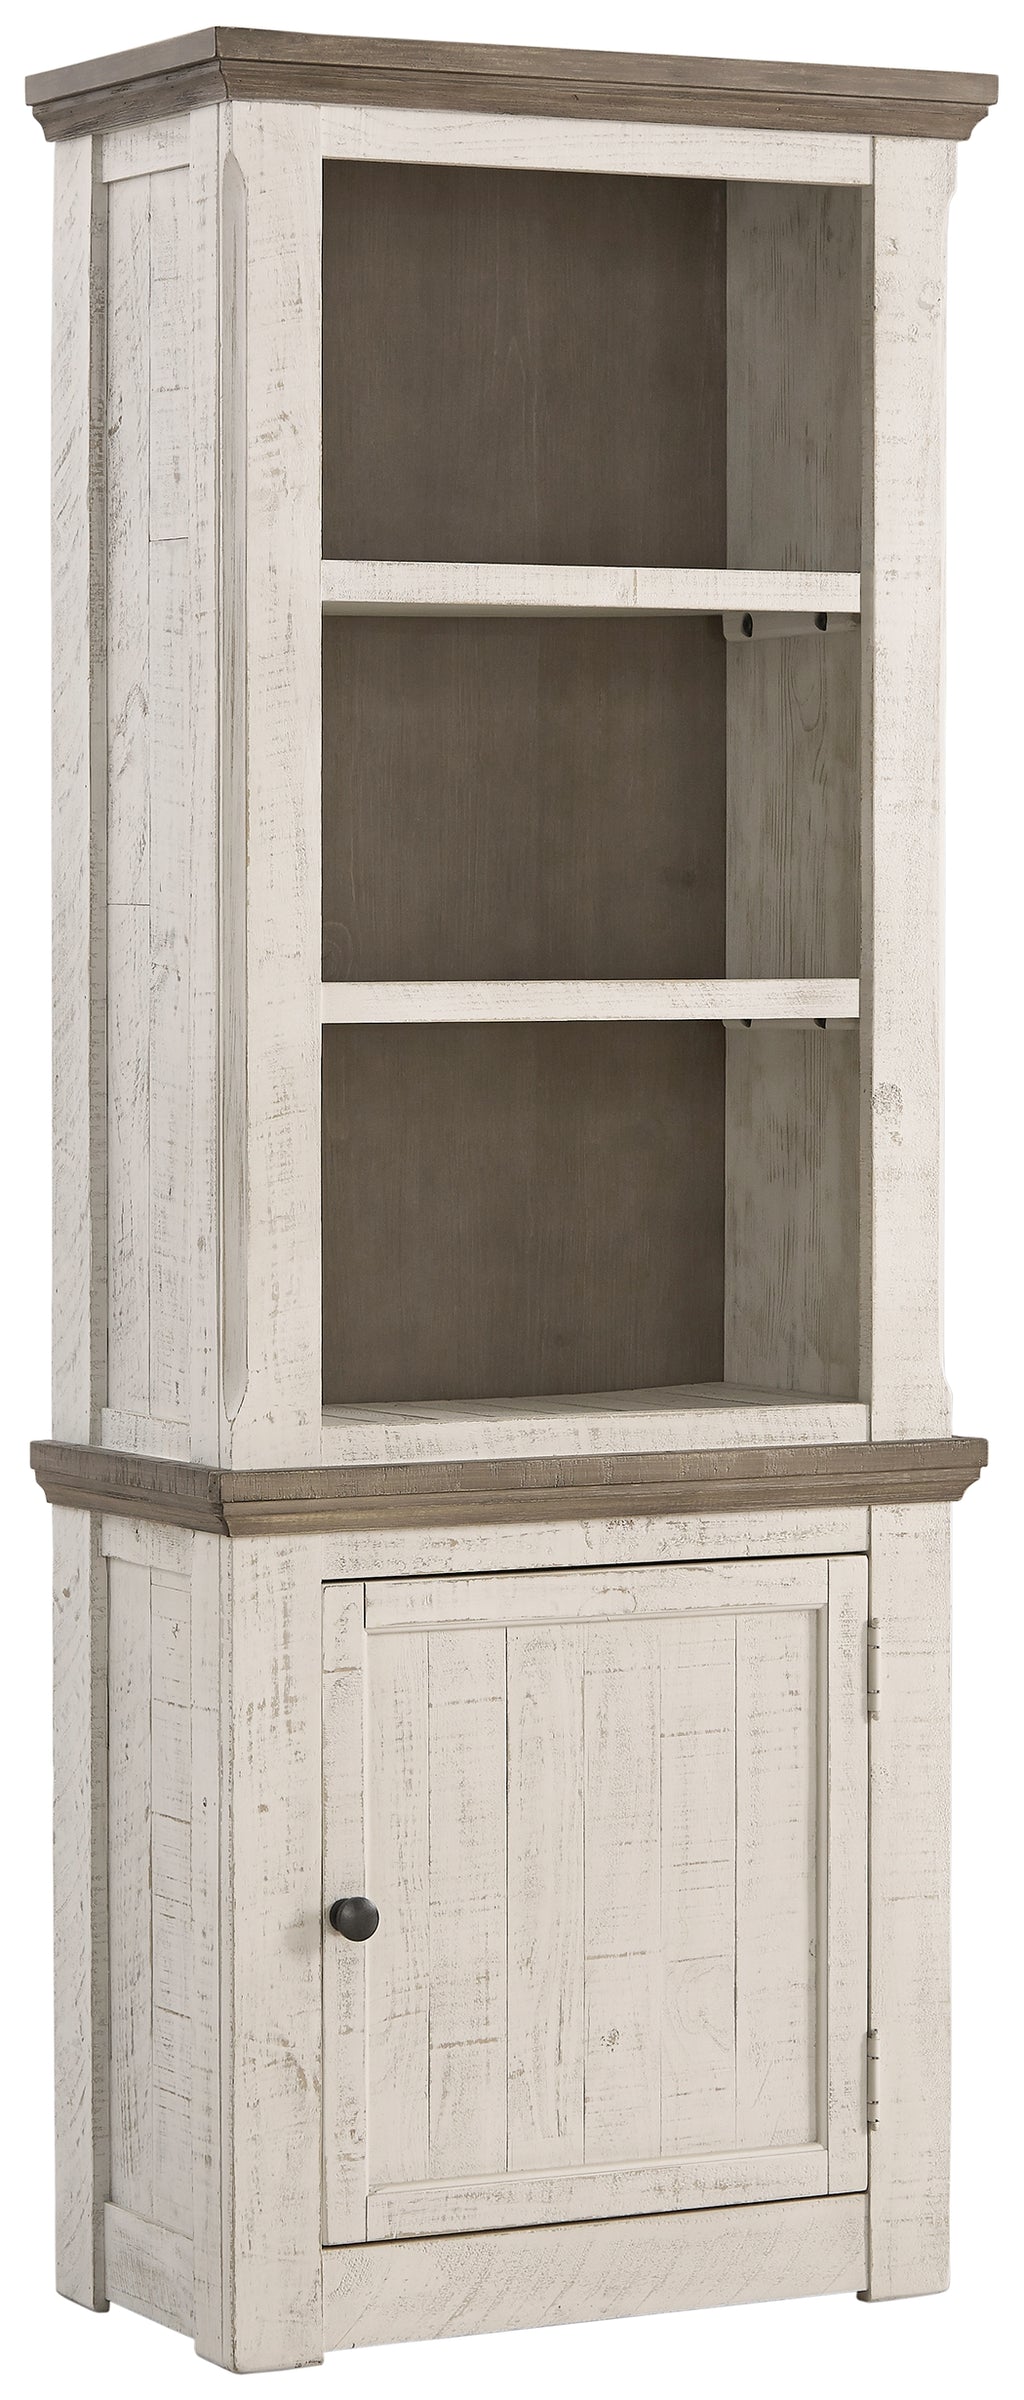 Havalance W814-34 Two-tone Right Pier Cabinet